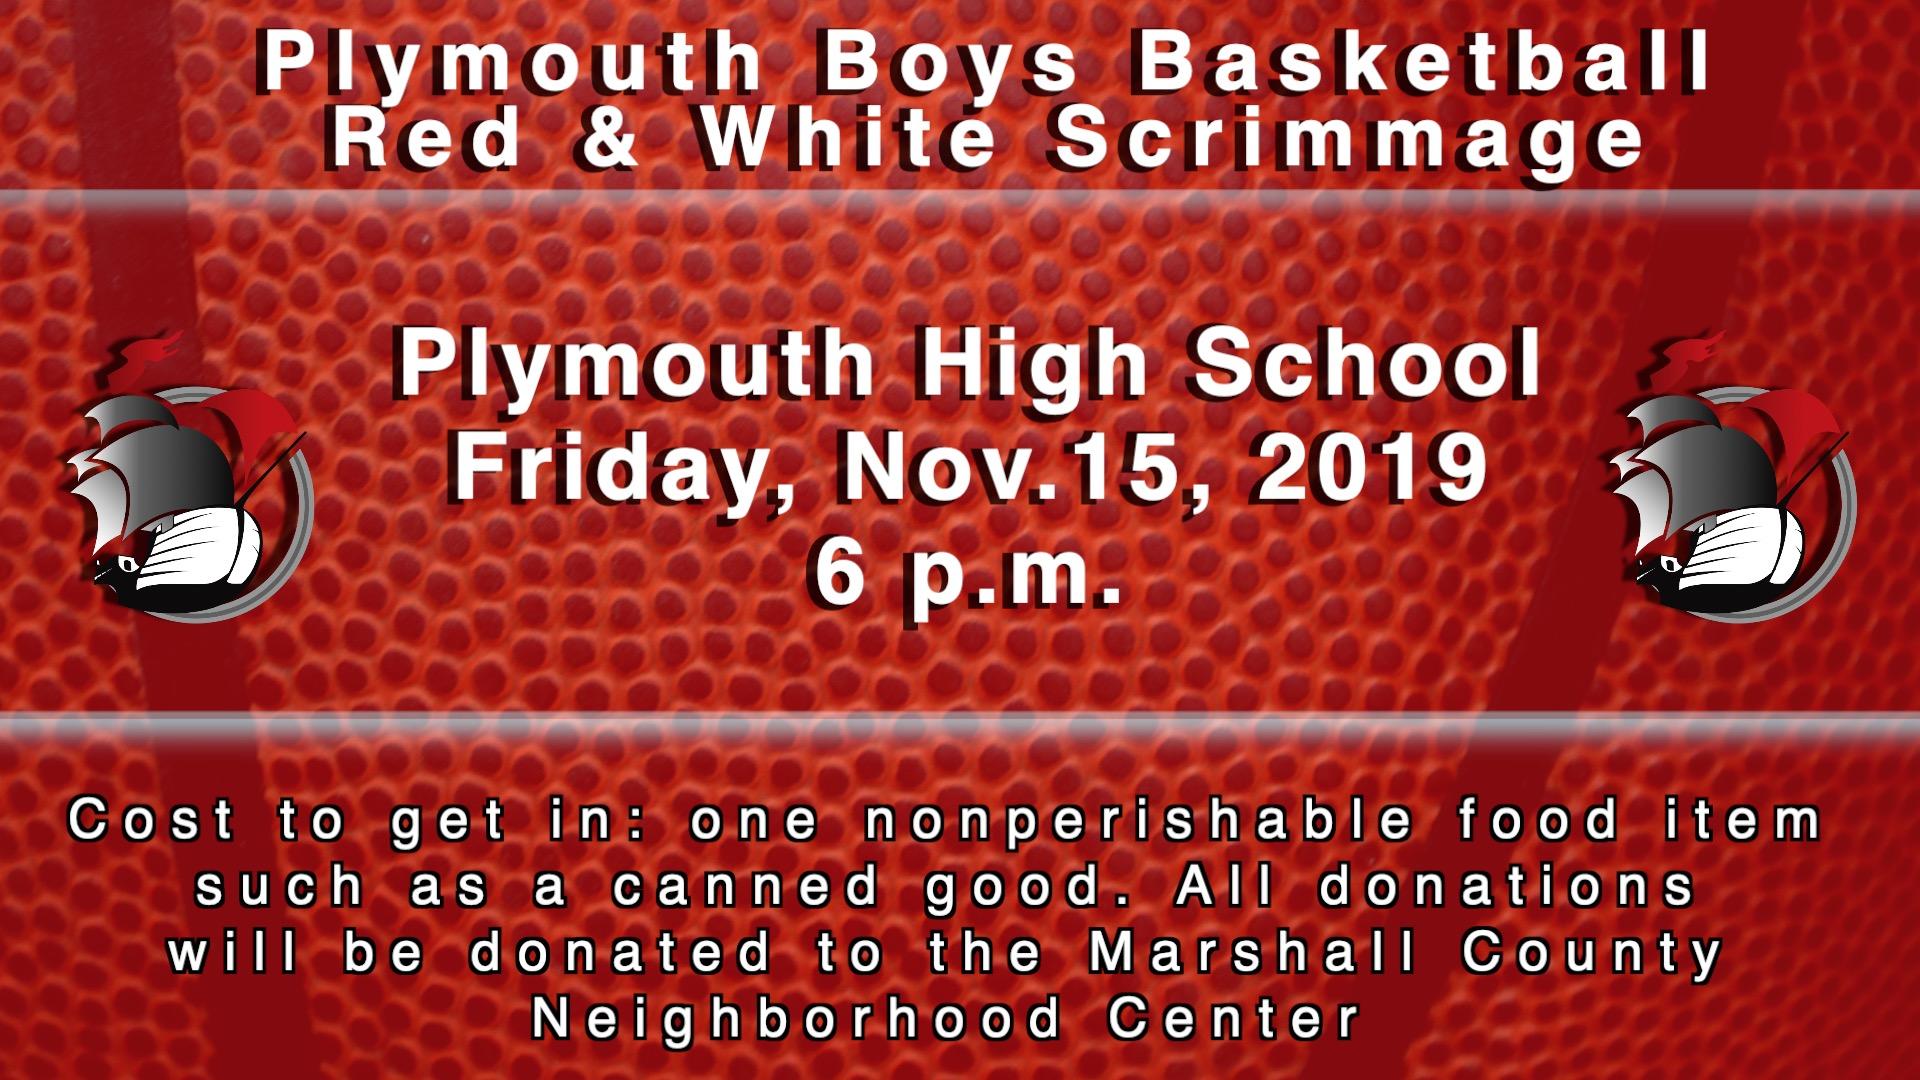 Plymouth Boys Basketball Red & White Scrimaage Plymouth High School Friday, November 15, 2019 6 p.m. Cost to get in: one nonperishable food item such as a canned good. All donations will be donated to the Marshall County Neighborhood Center on basketball image with PHS Ship logos